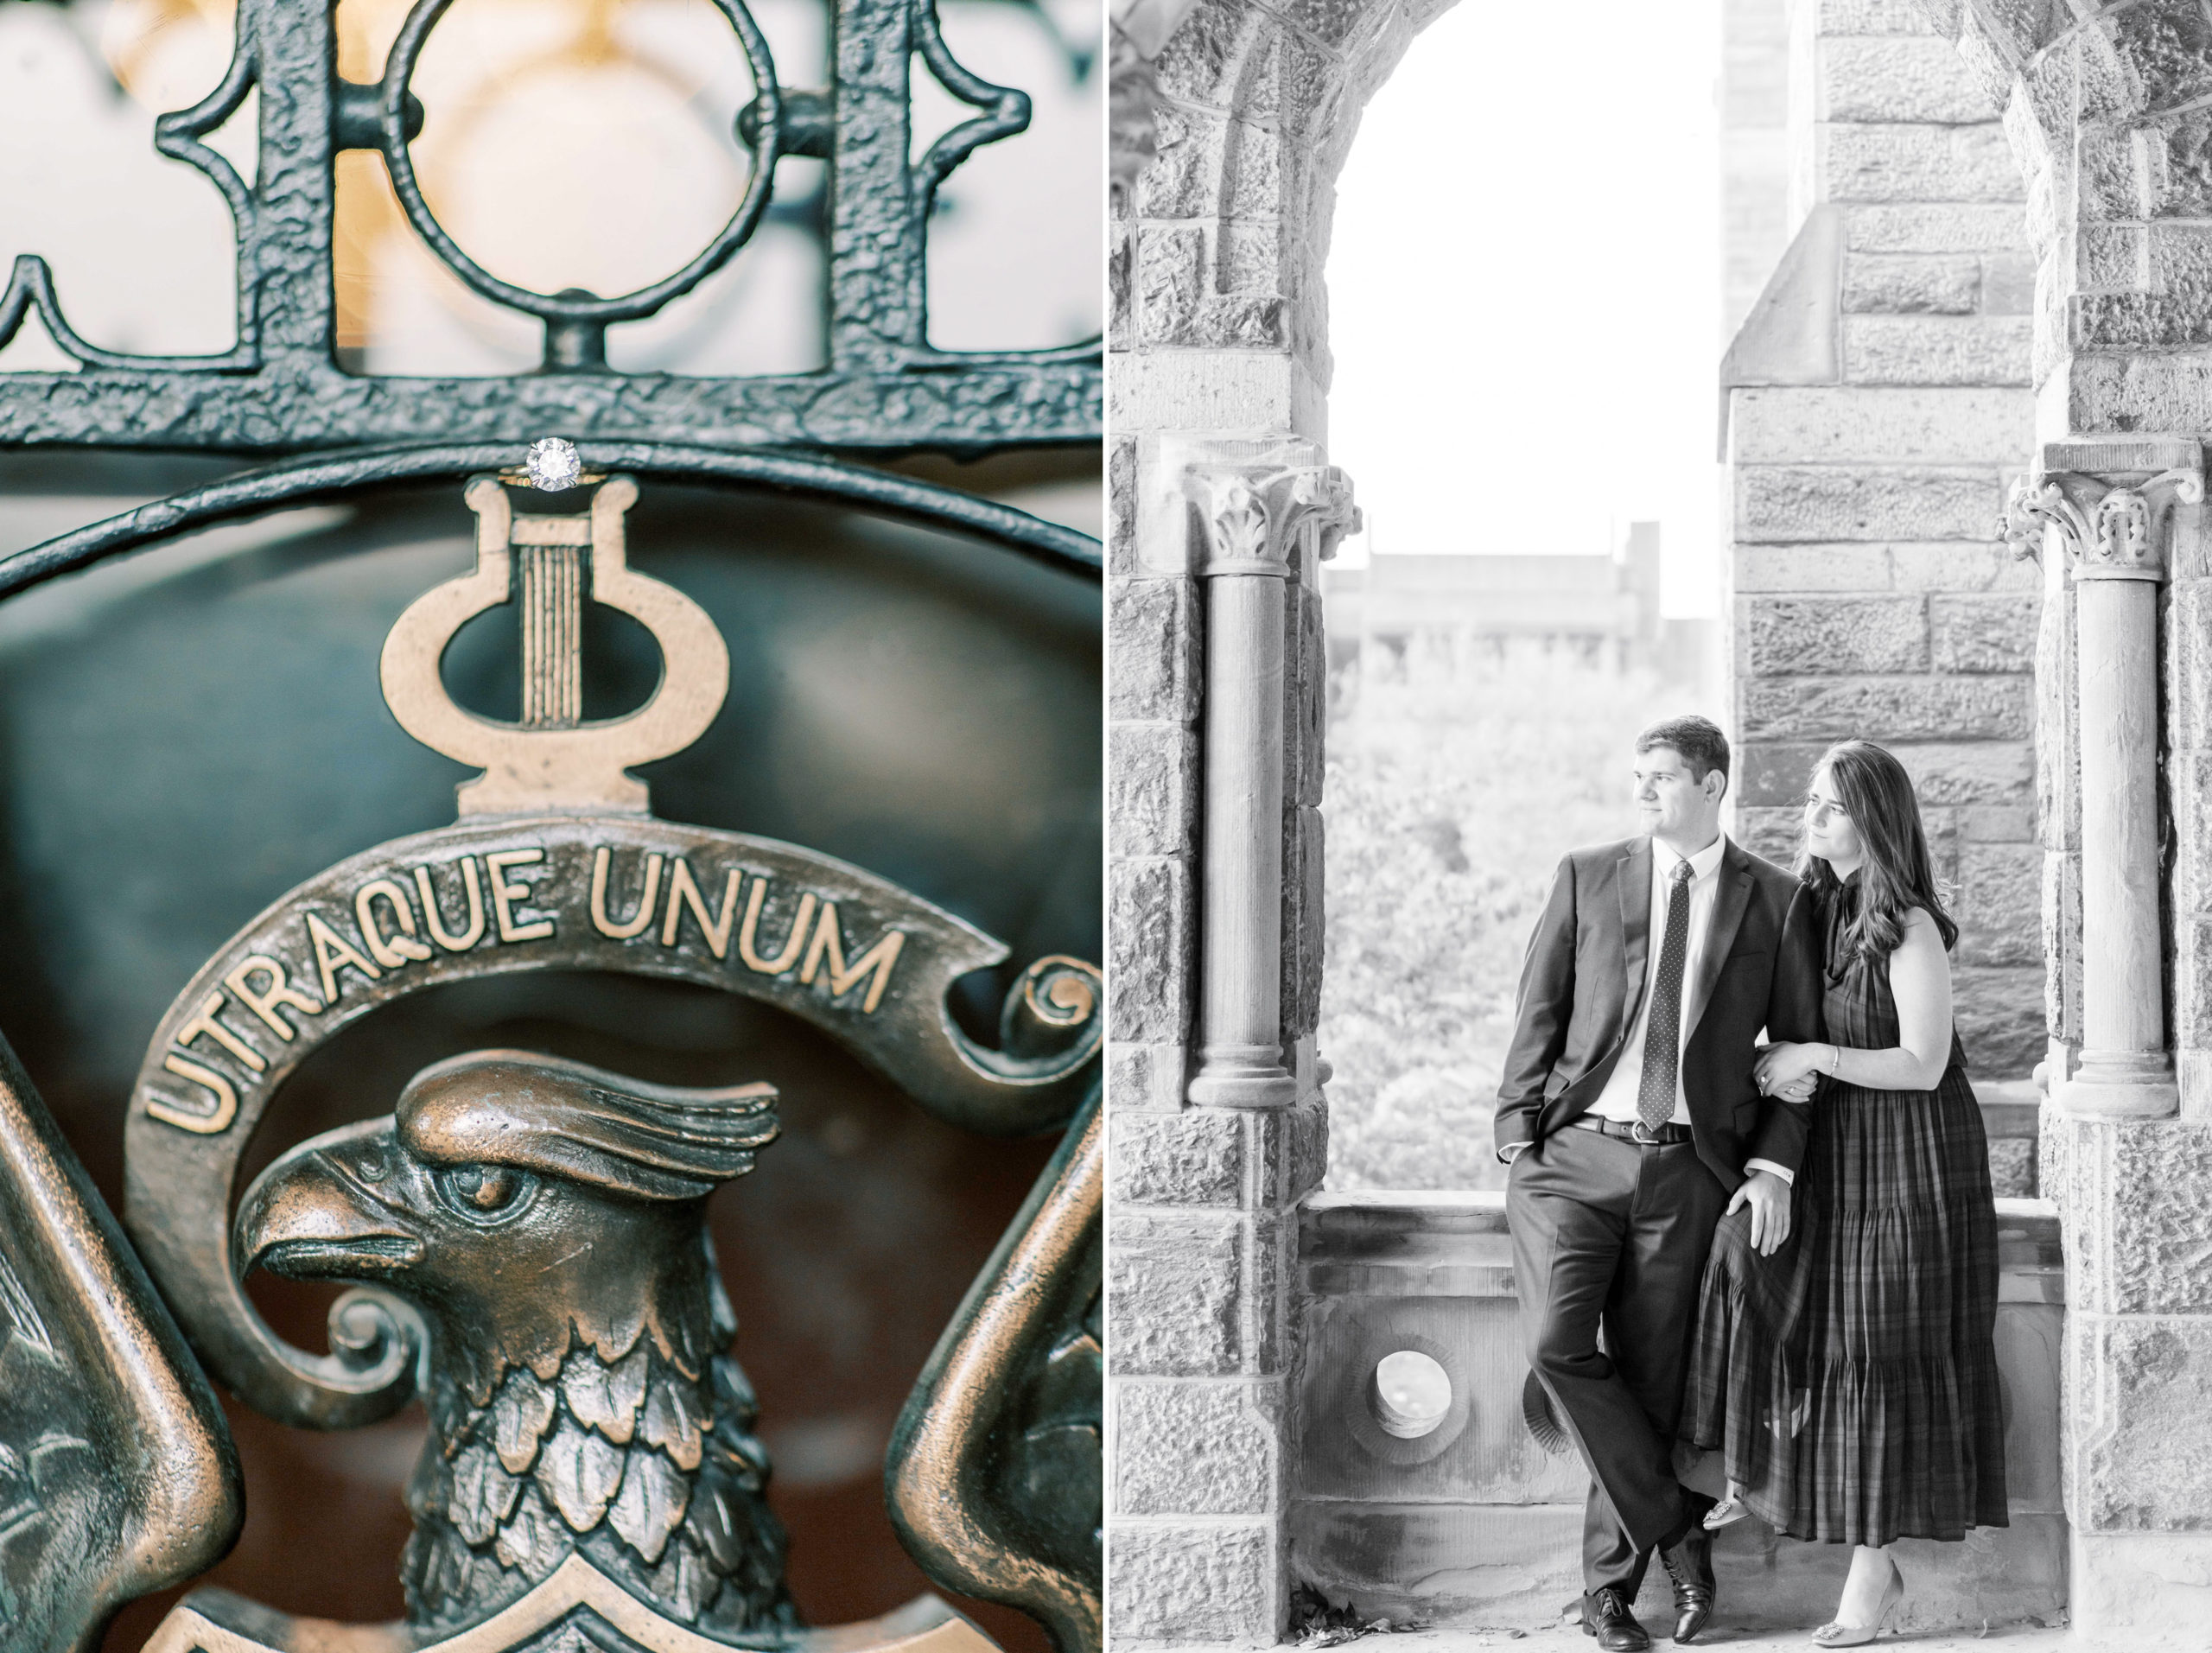 A classic Georgetown University Engagement Session in Washington, DC by wedding photographer Alicia Lacey.